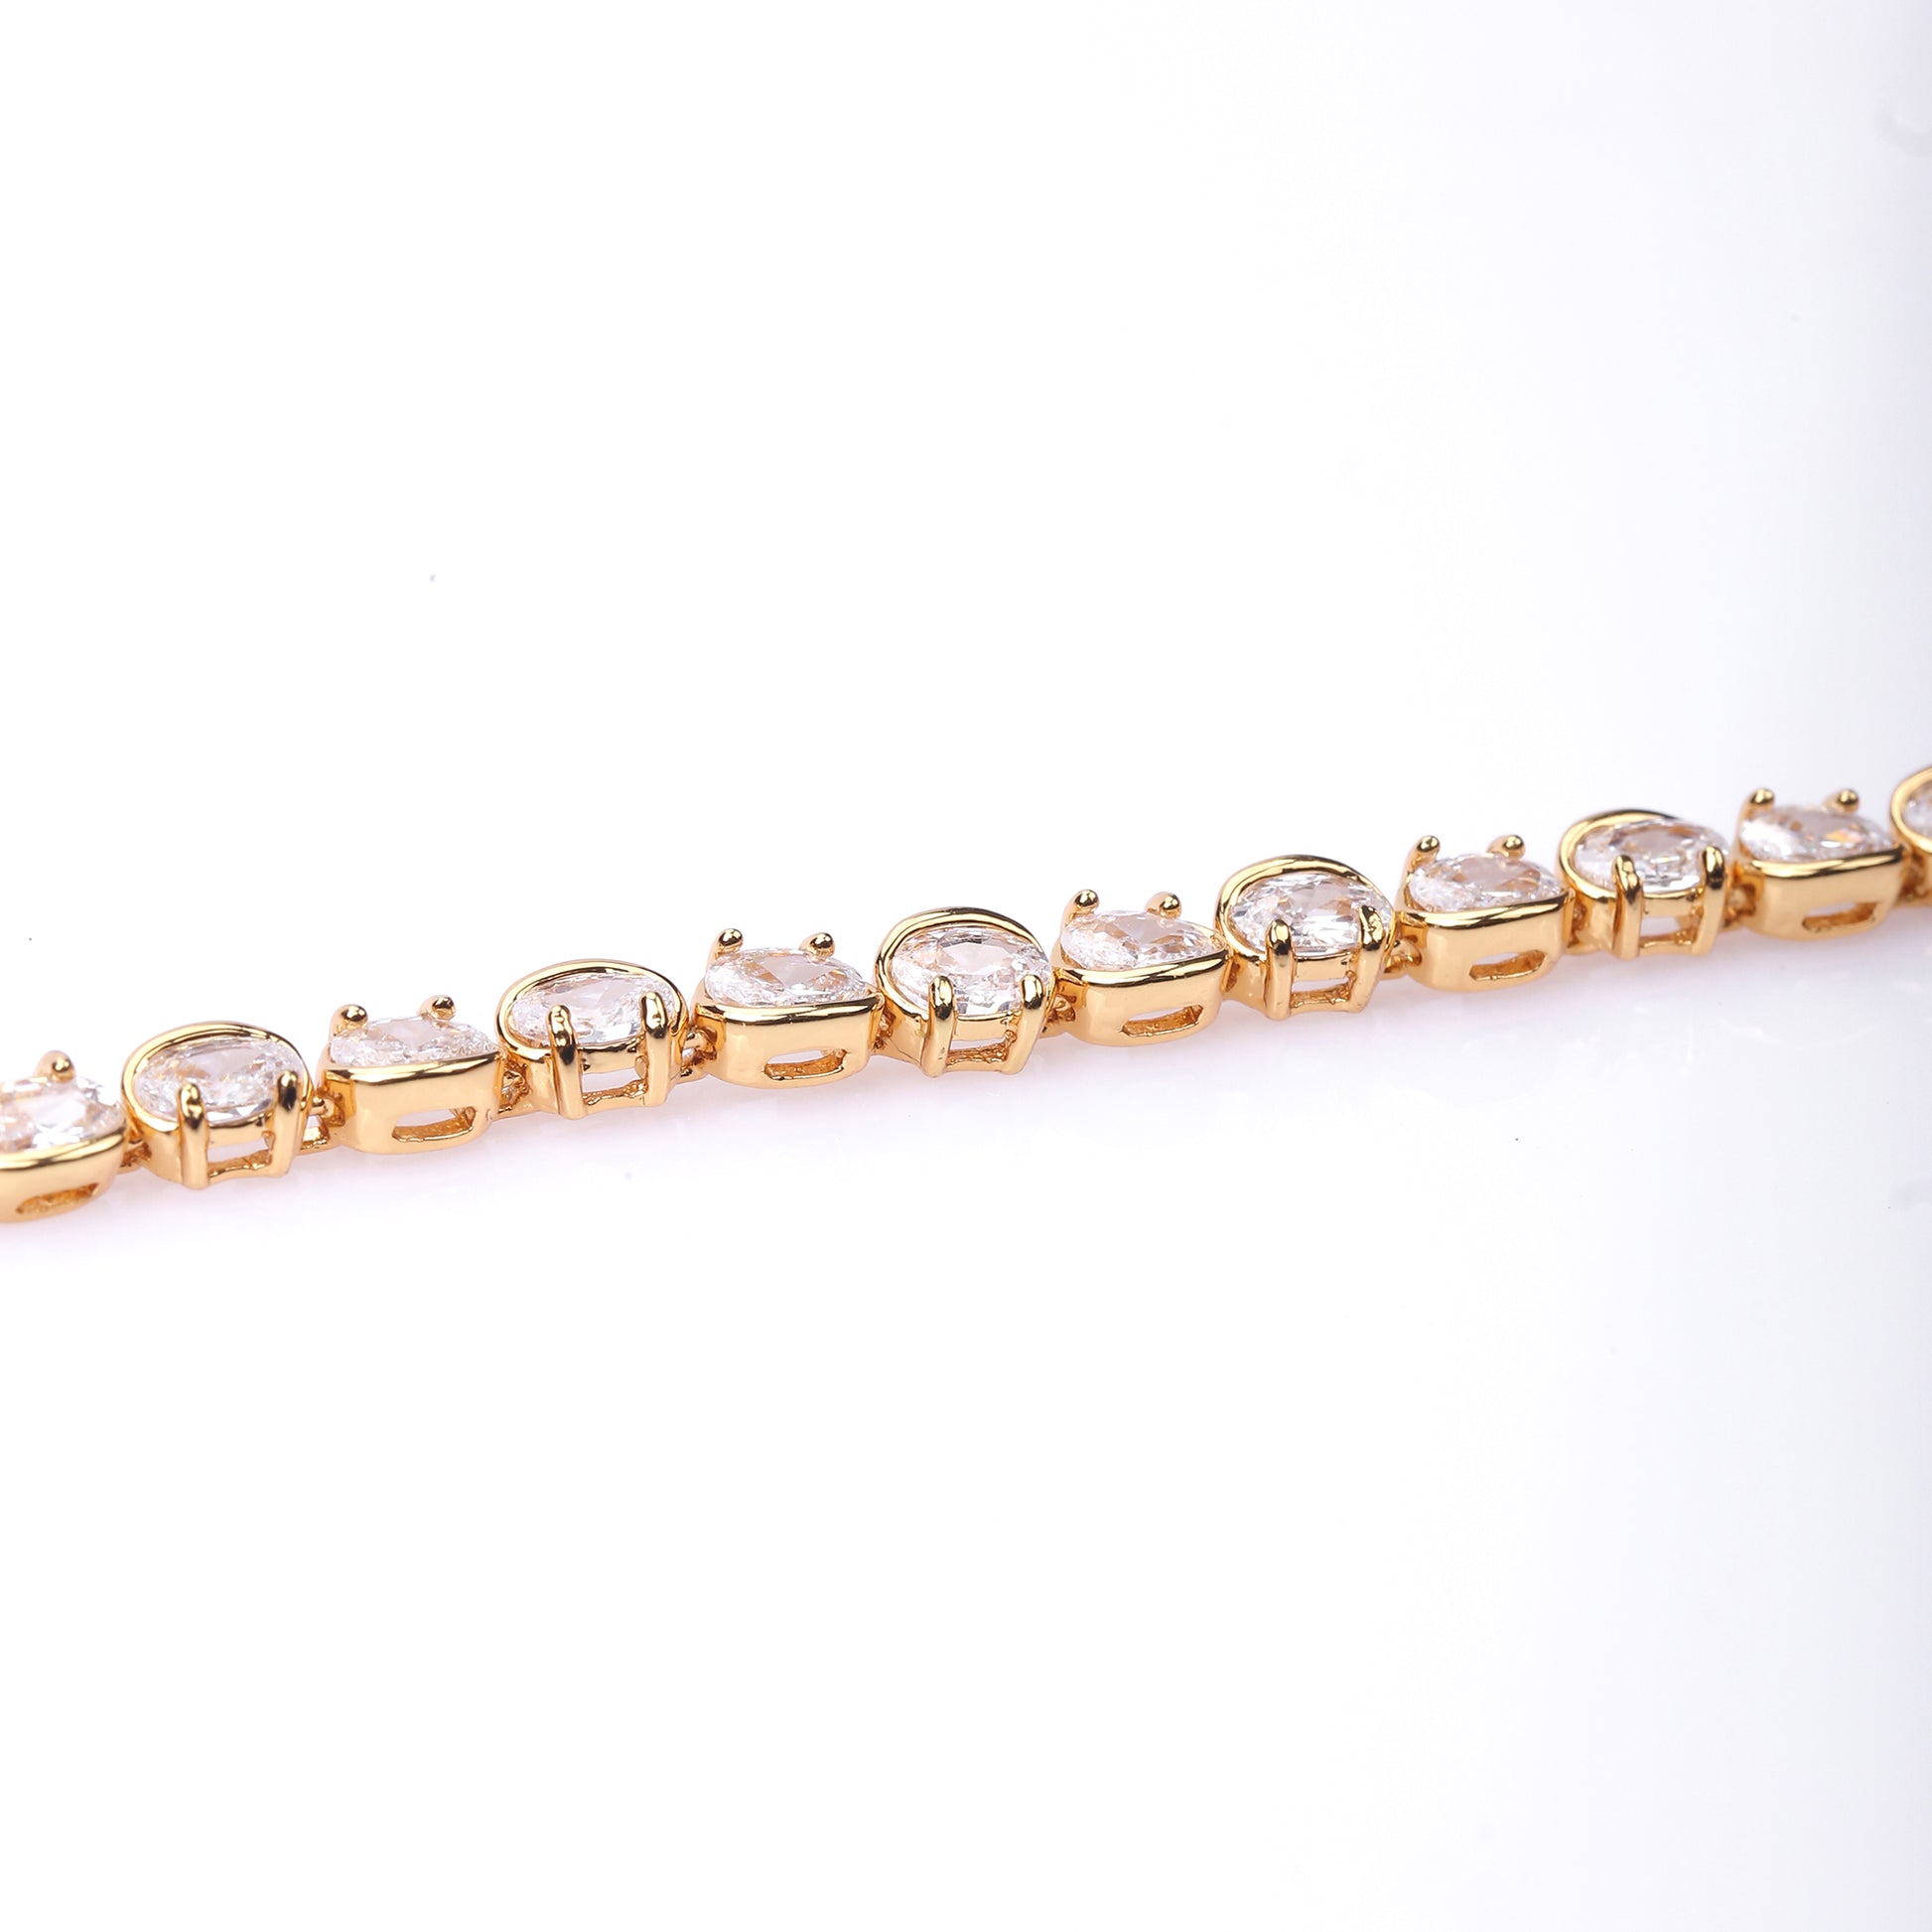 Image of (Ovalis Bracelet) from an exquisite collection by Al Musk Jewellery.